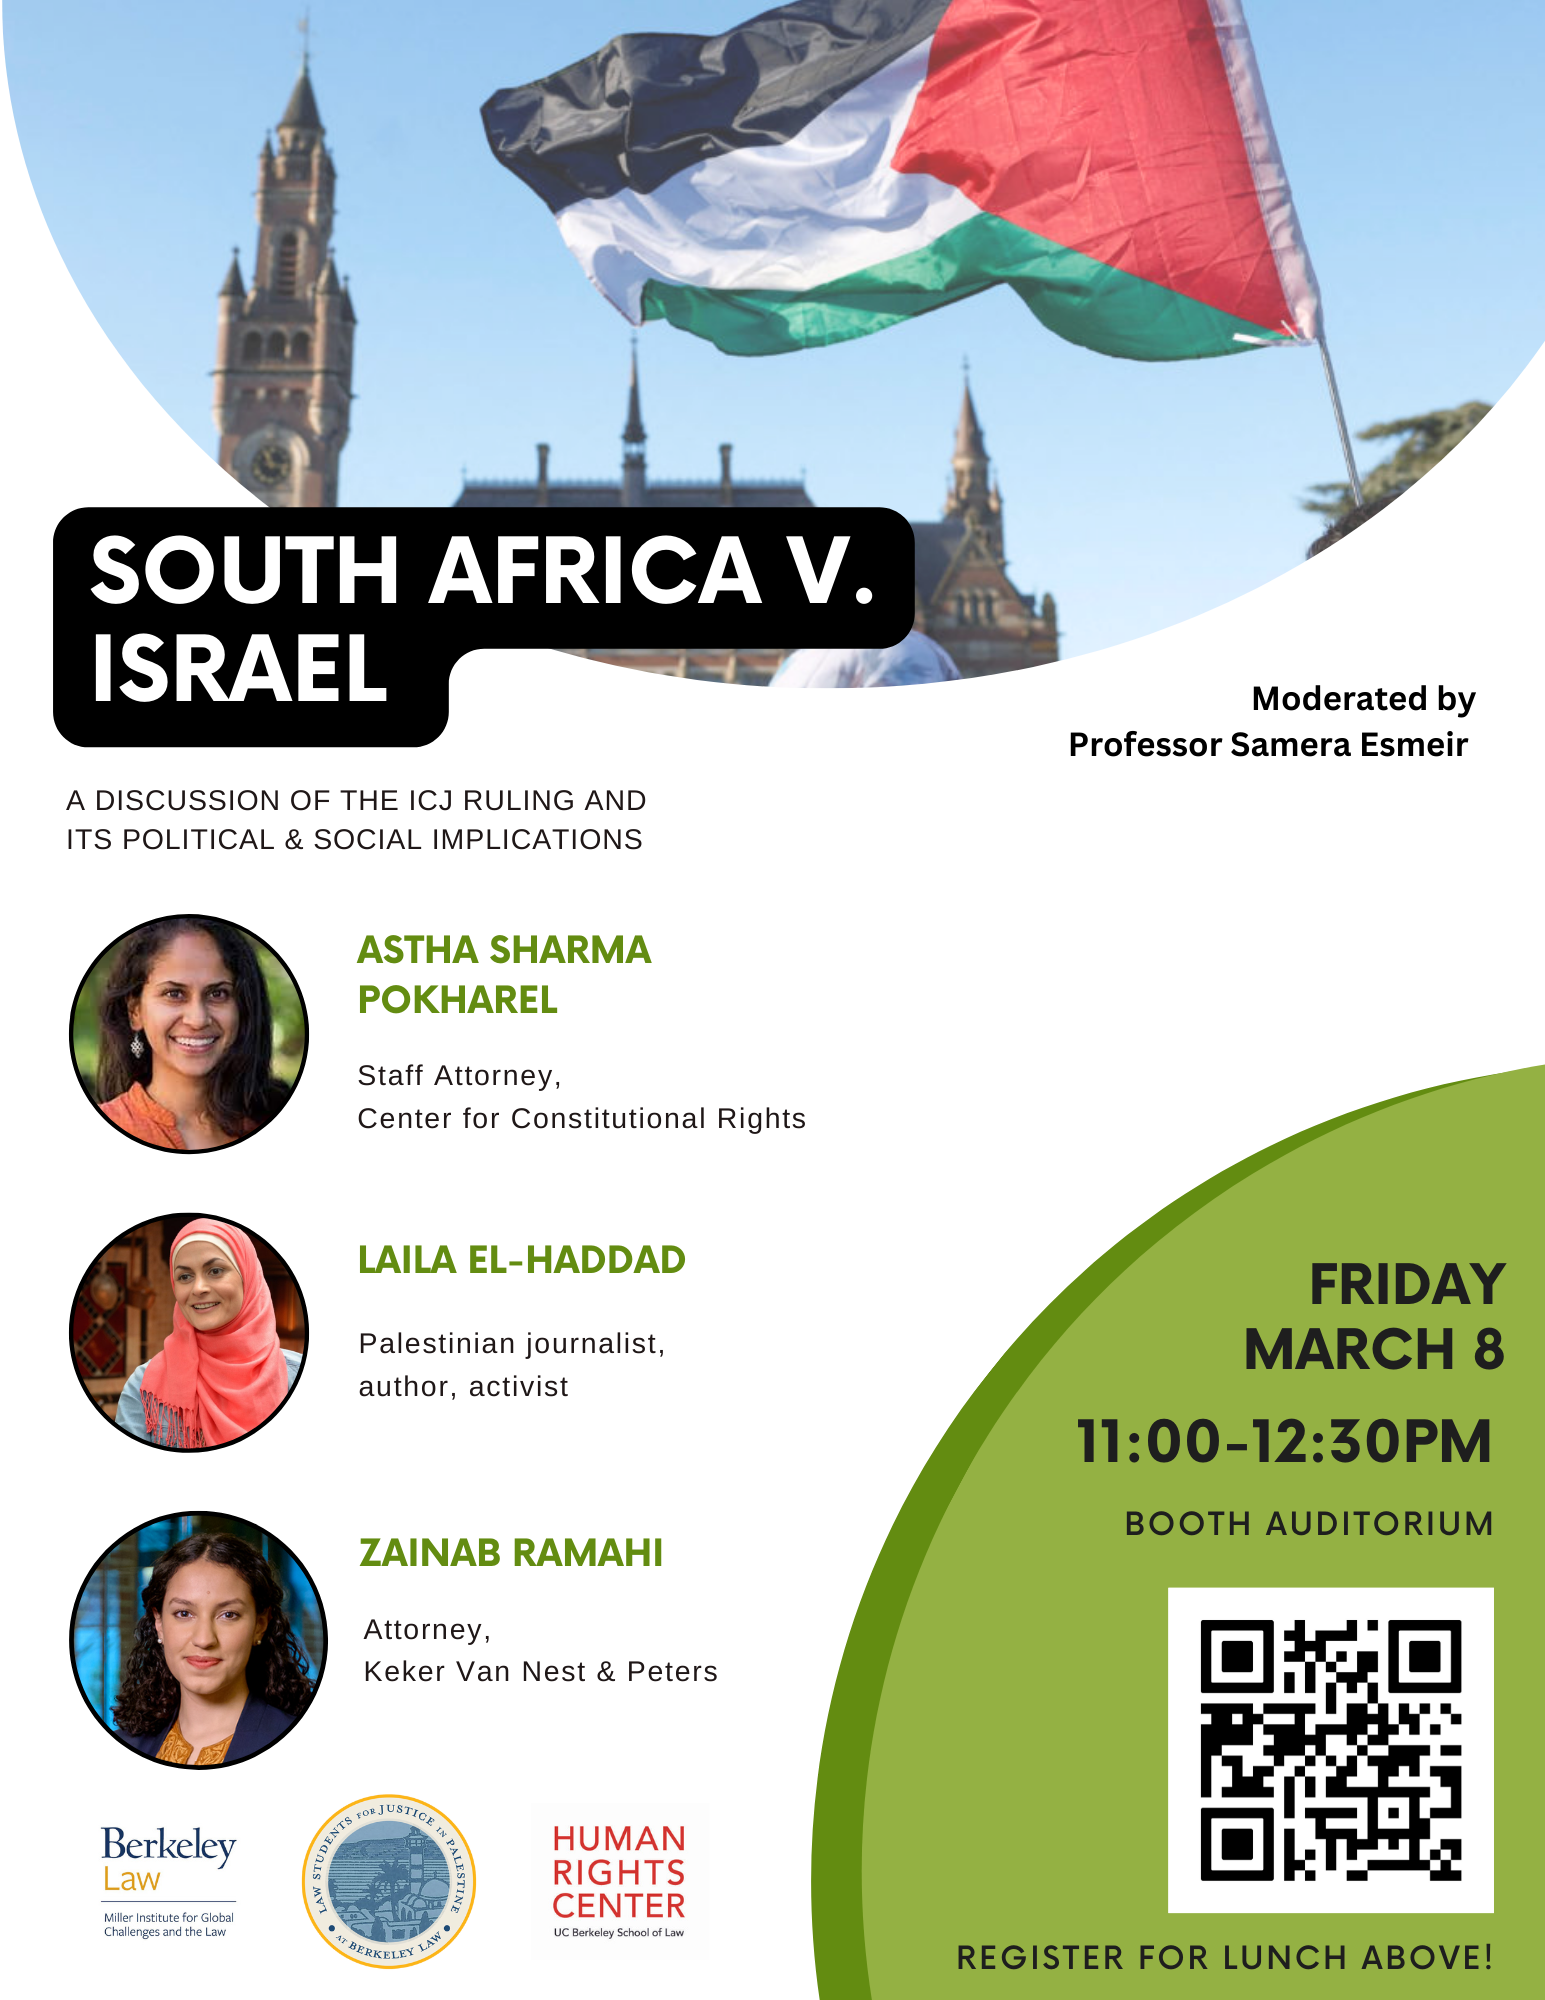 White image with a photo of the Palestinian flag flying in front of the ICJ at the top. South Africa v. Israel. A Discussion of the ICJ ruling and its political and social implications. Moderated by Professor Samera Esmeir. Headshots of: Astha Sharma Pokharel, Staff Attorney, Center for Constitutional Rights; Laila ElHaddad, Palestinian journalist, author, activist; and Zainab Ramahi, Attorney, Keker Van Vest & Peters. Logos of Berkeley Law and Human Rights Center underneath. In the lower right corner: Friday March 8, 11:00 - 12:30pm. Booth Auditorium. Register for Lunch Above!